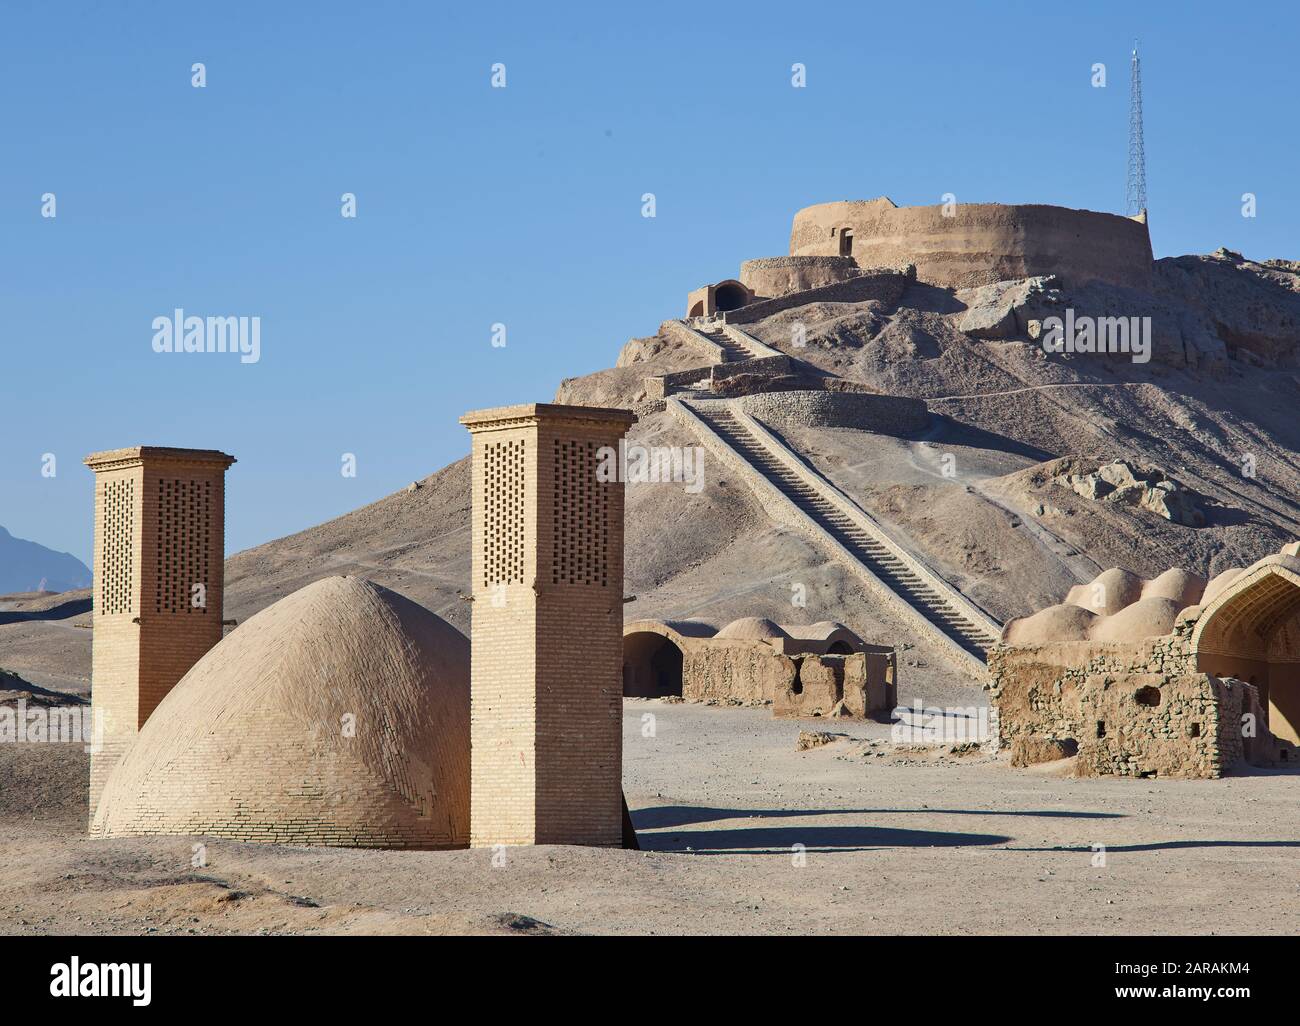 Silence towers on the outskirts of the desert city of Yazd in Iran, taken on November 17, 2017. Zarathustrians who had died until 1960 were kept here, so that the vultures cleaned the bones of the meat. The bones were then collected in the center of the towers. Yazd is one of the oldest cities in Iran with a population of around 650,000 people. The old town was declared a UNESCO World Heritage Site in 2017. | usage worldwide Stock Photo